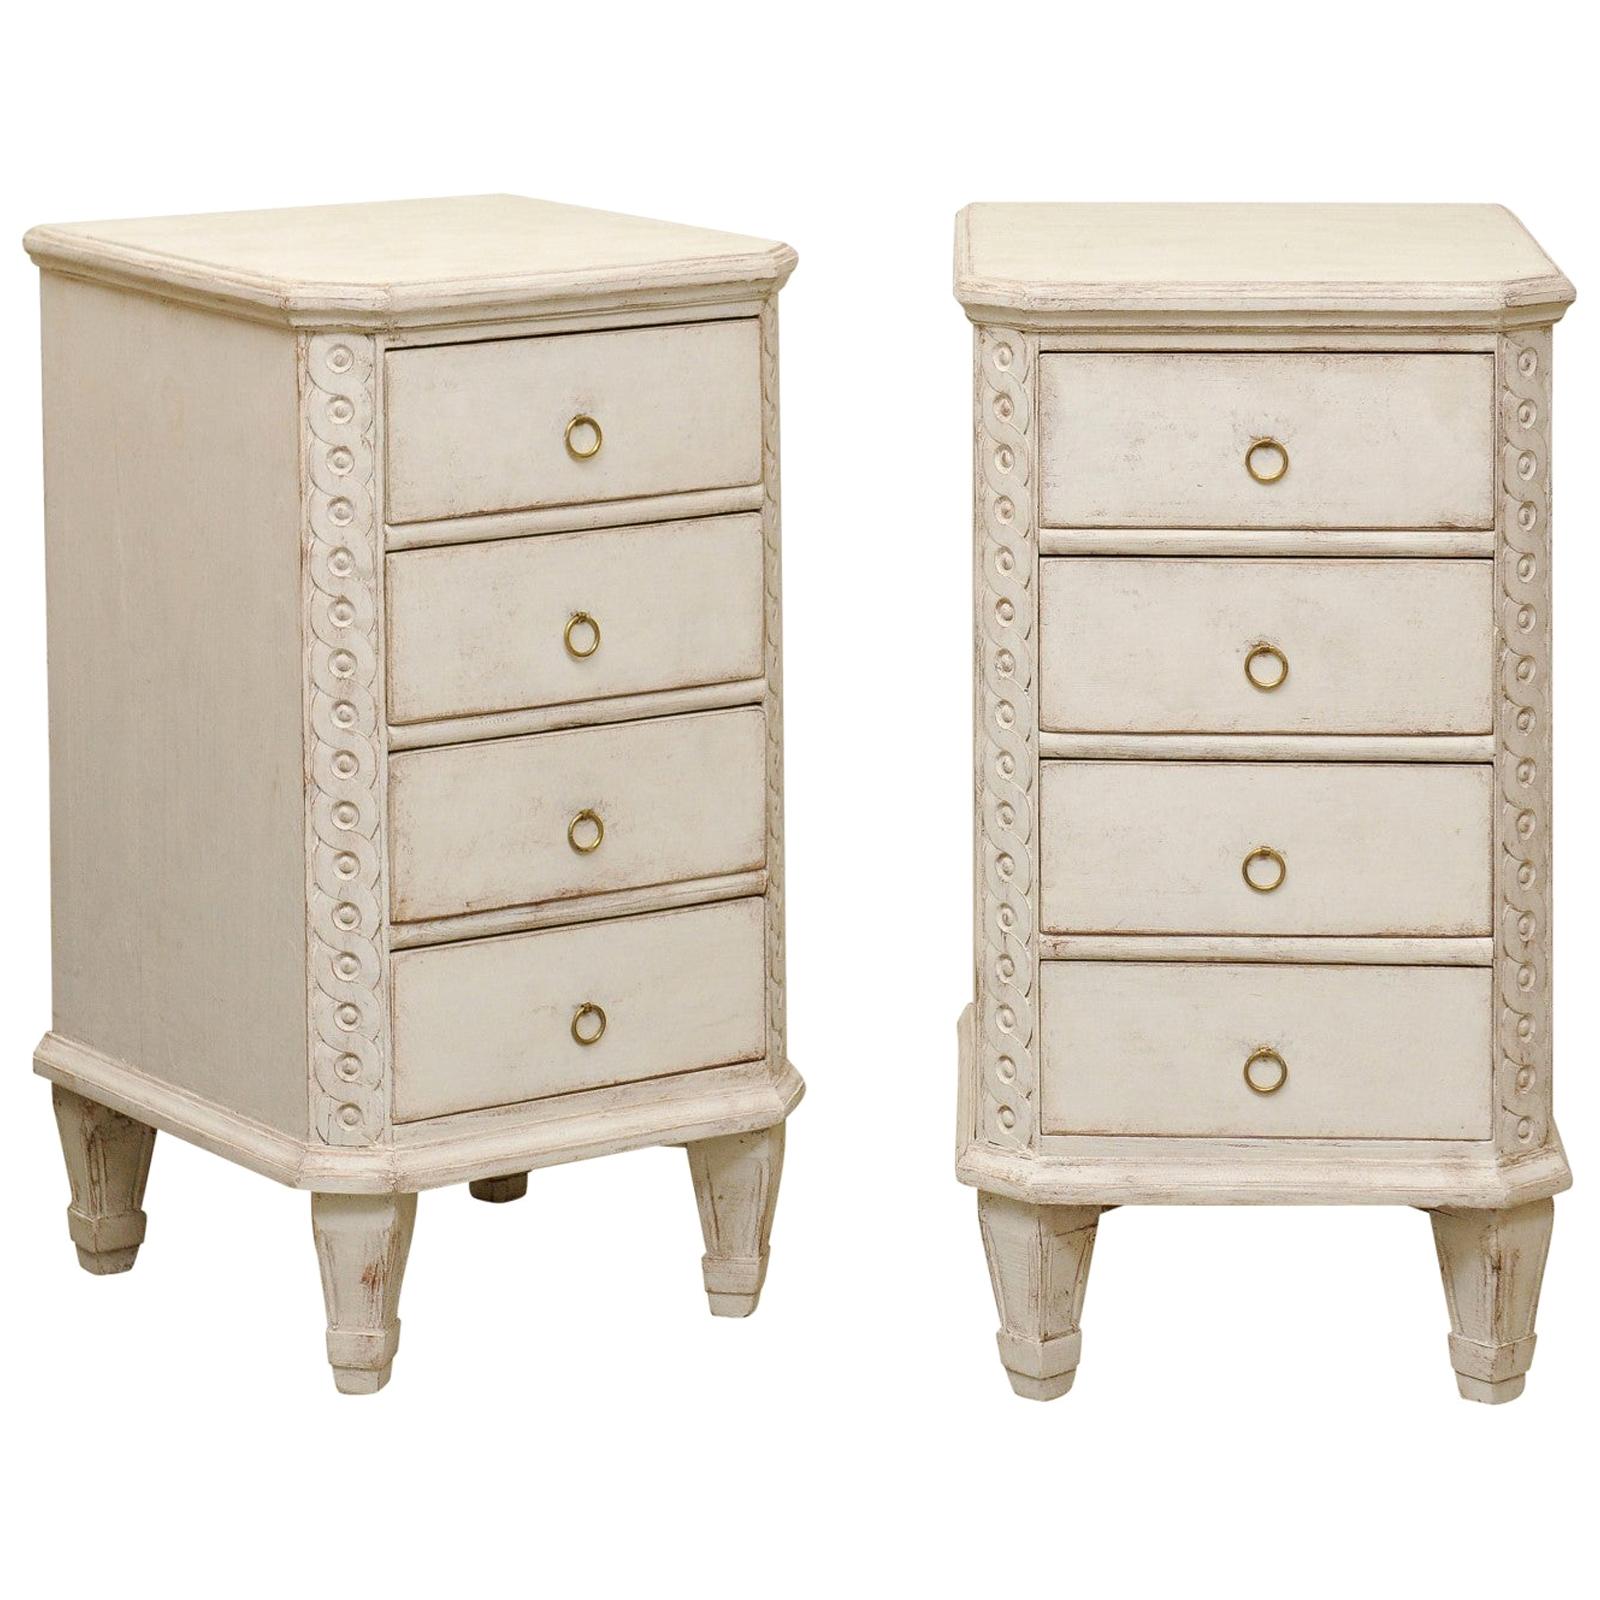 Pair of Swedish Neoclassical Style Painted Nightstand Tables with Guilloches